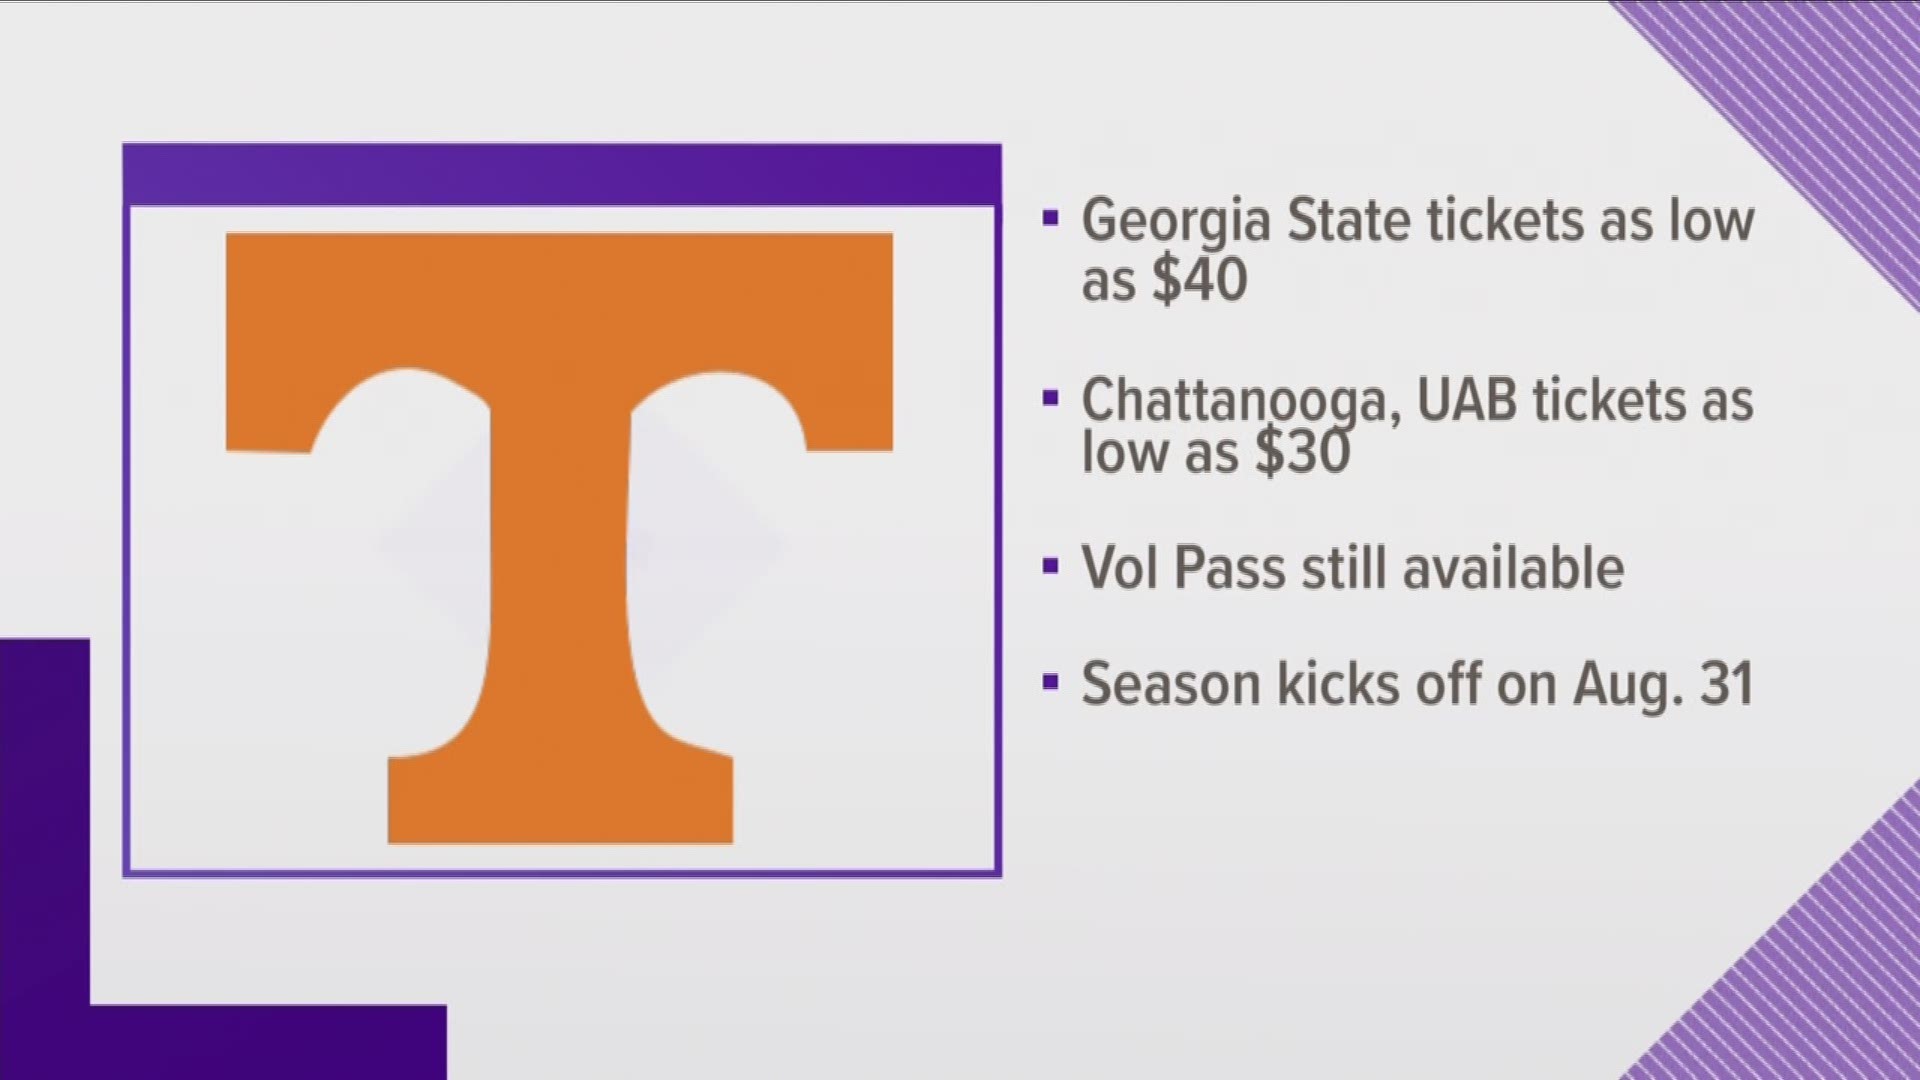 UT announced Monday tickets for its home opener against Georgia State are as low as $40.